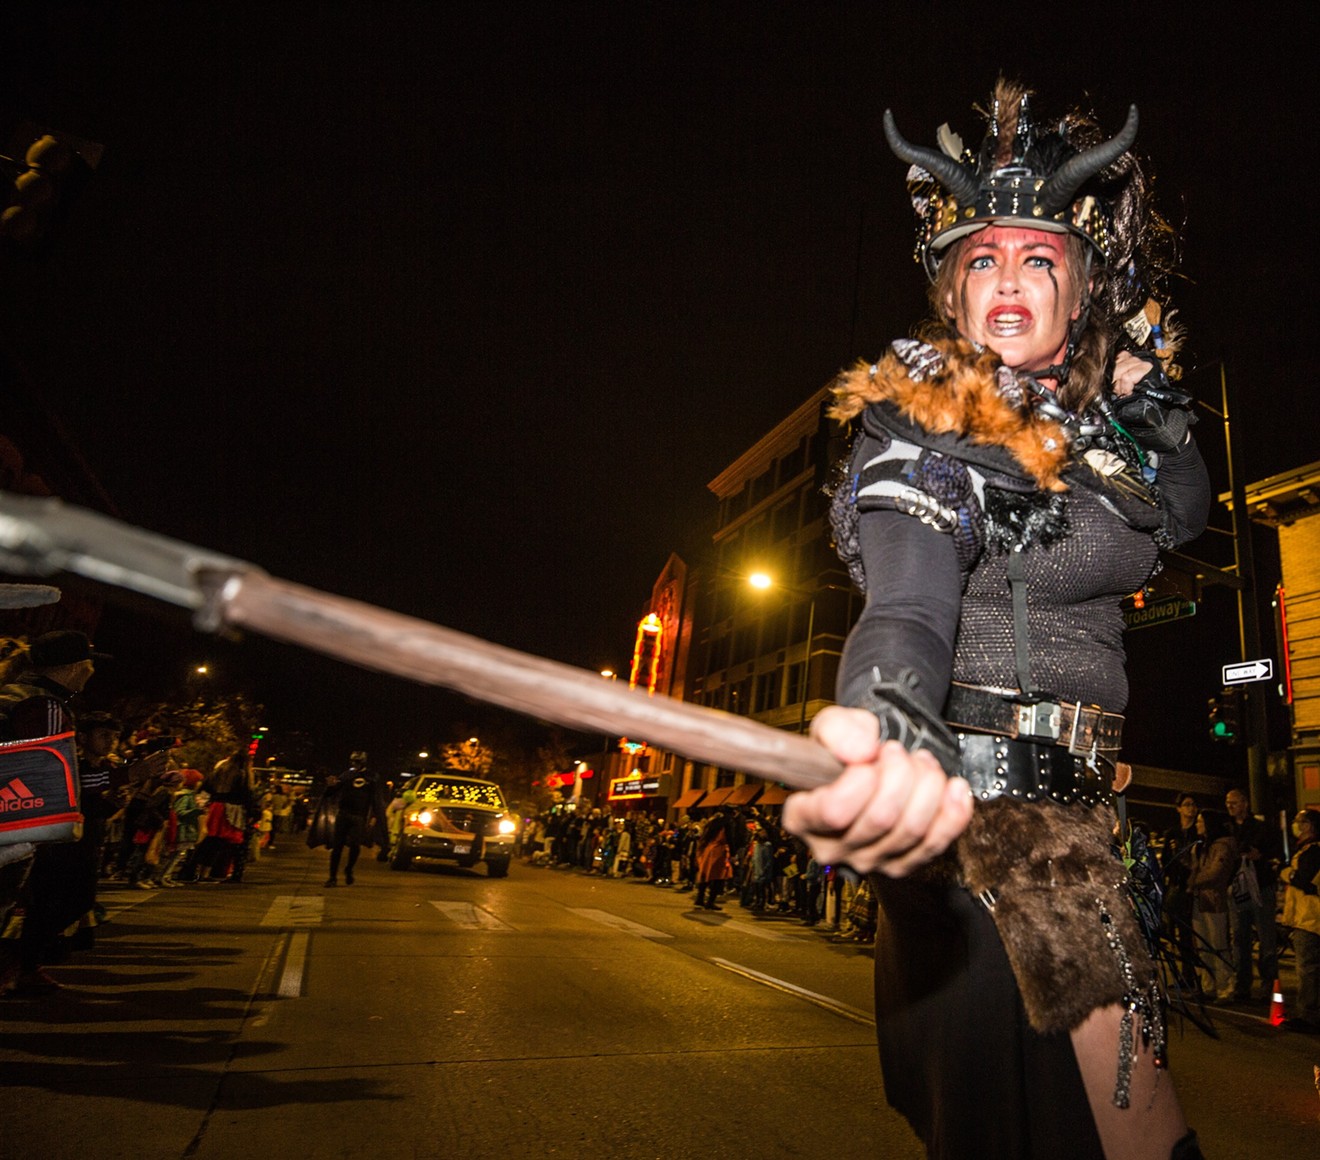 Halloween partiers will be free to fill the streets this weekend as Denver closes some LoDo streets to vehicle traffic.